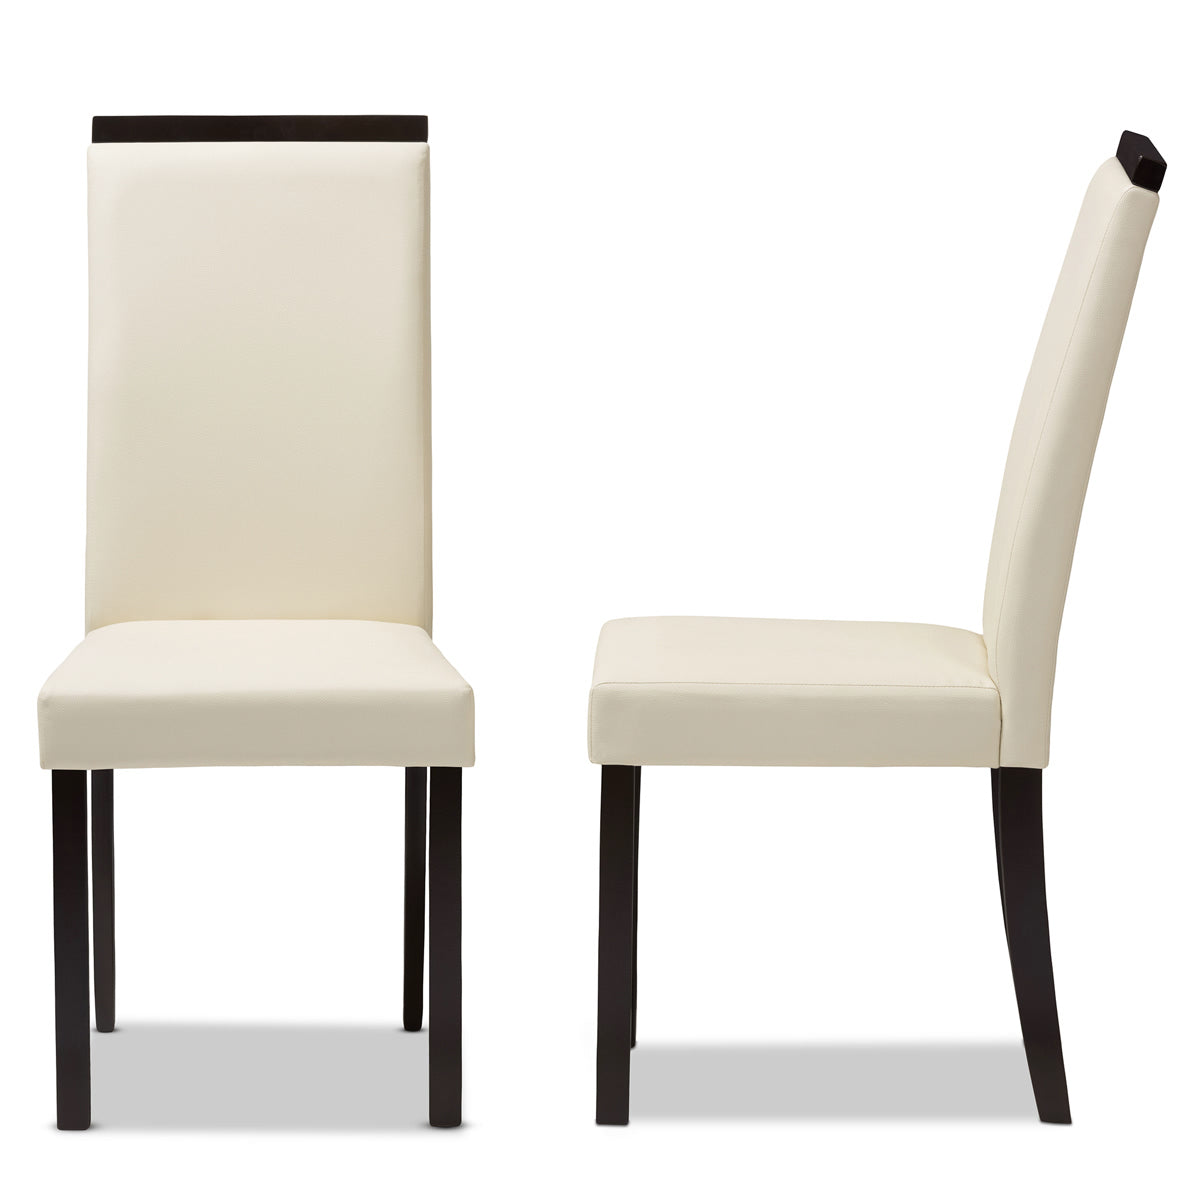 Baxton Studio Daveney Modern and Contemporary Cream Faux Leather Upholstered Dining Chair (Set of 2) Baxton Studio-dining chair-Minimal And Modern - 2